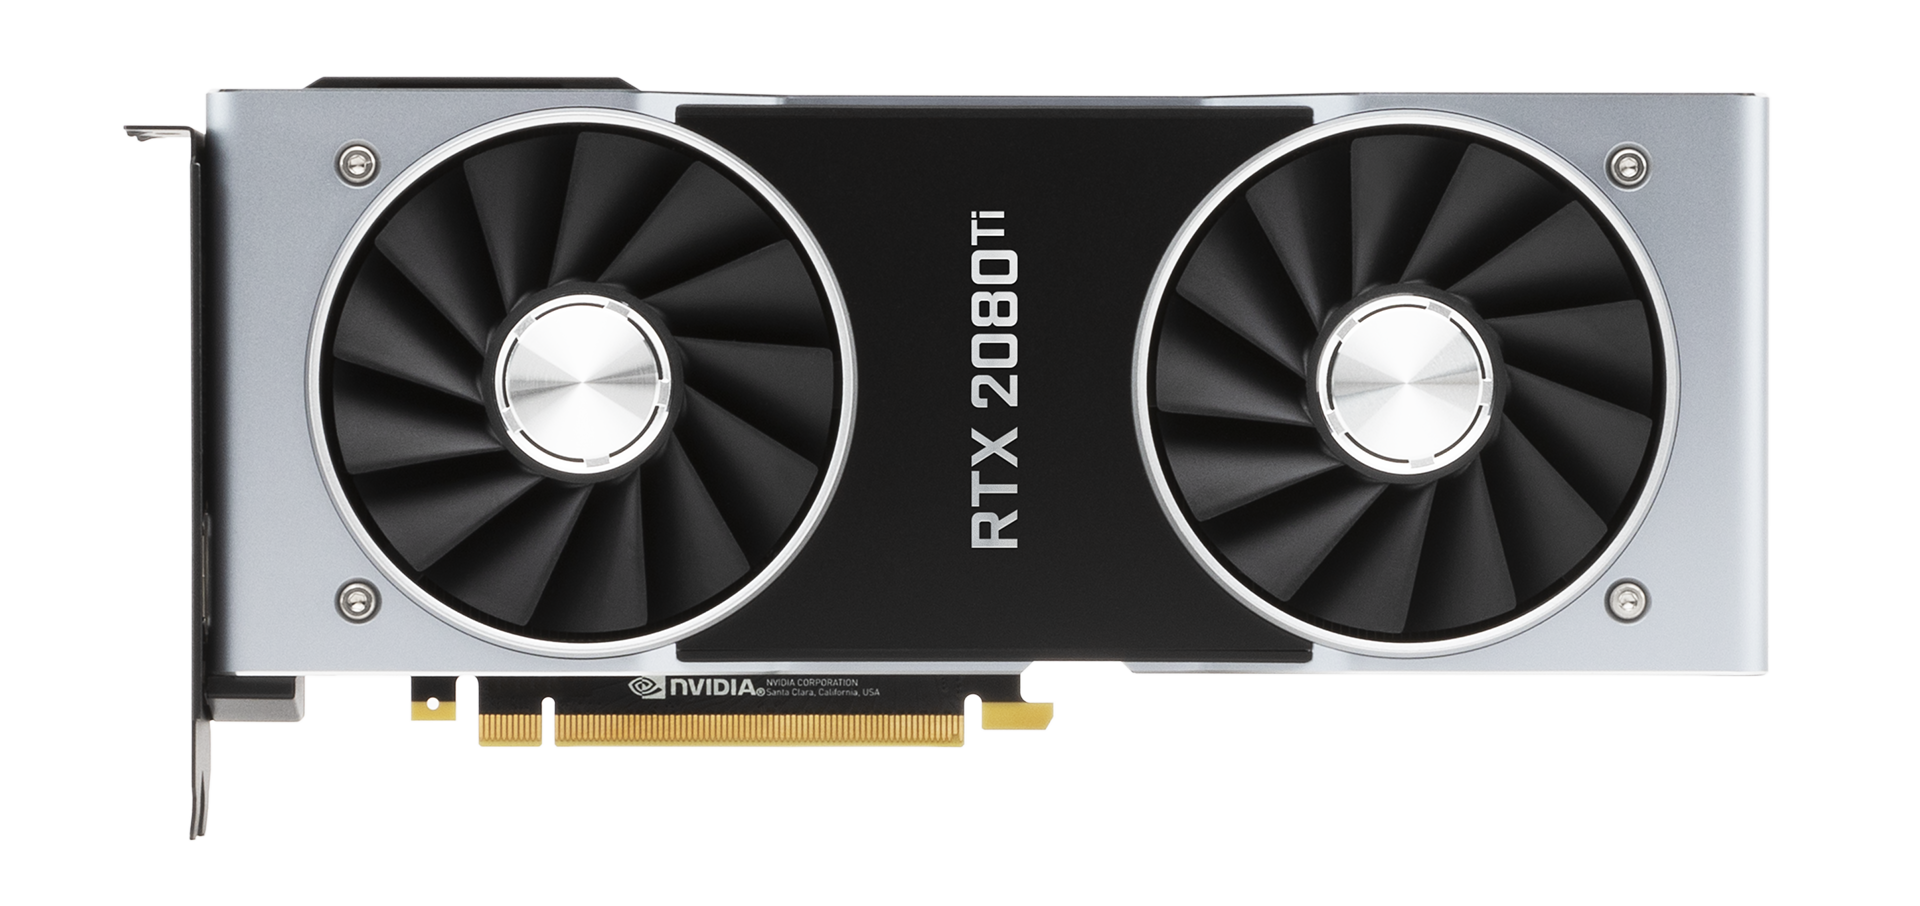 Review: Nvidia GeForce RTX 2080 Ti and RTX 2080 - Graphics - HEXUS.net